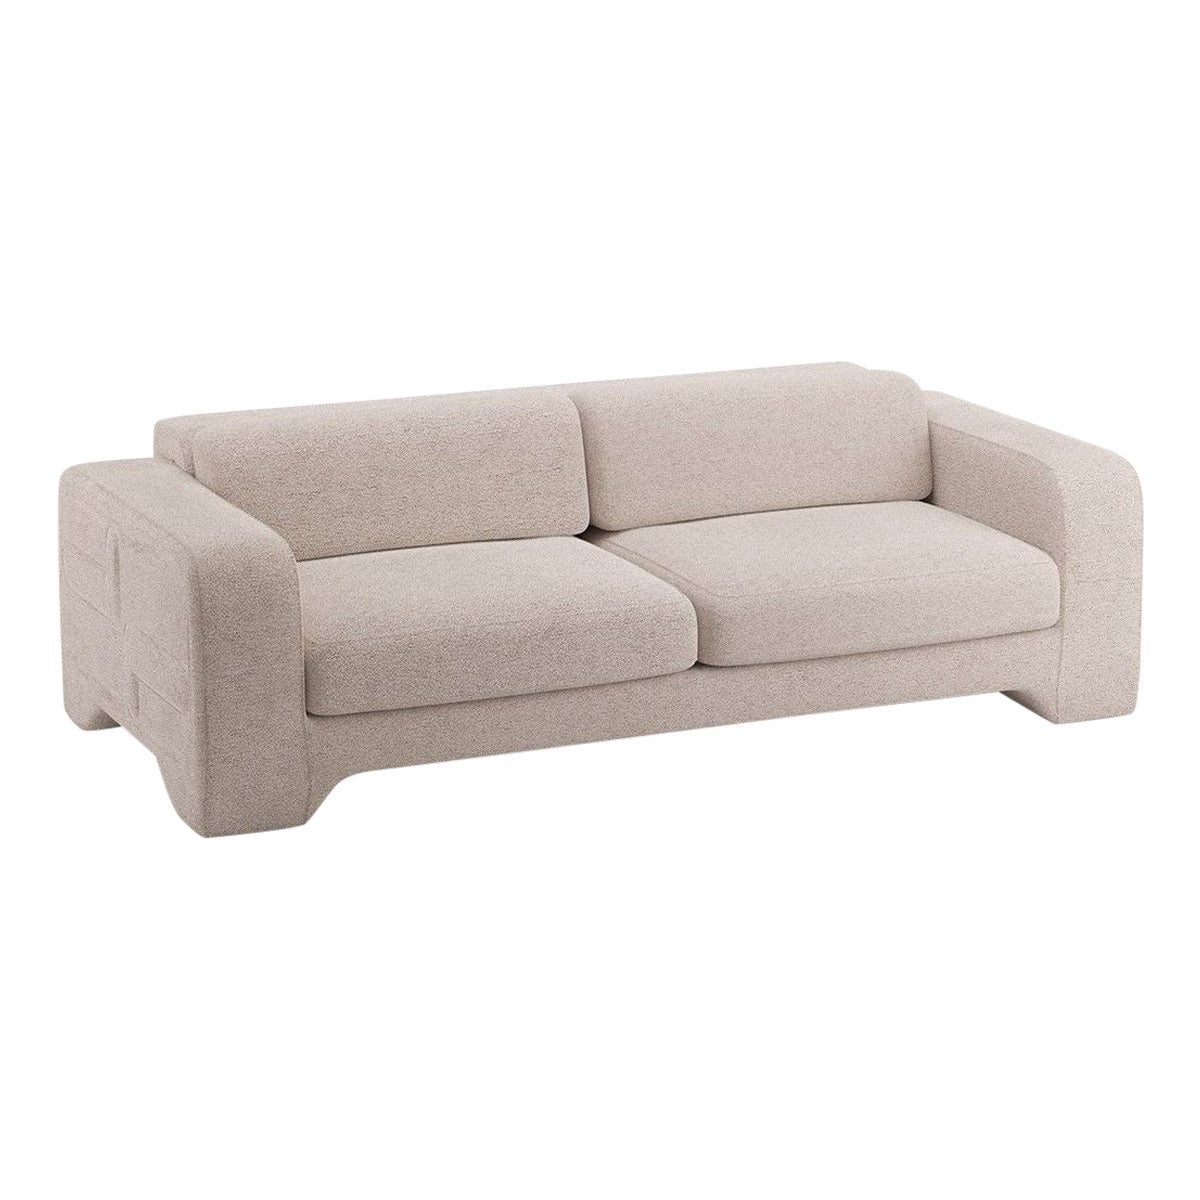 Popus Editions Giovanna 4 Seater Sofa in Mole Malmoe Terry Upholstery For Sale